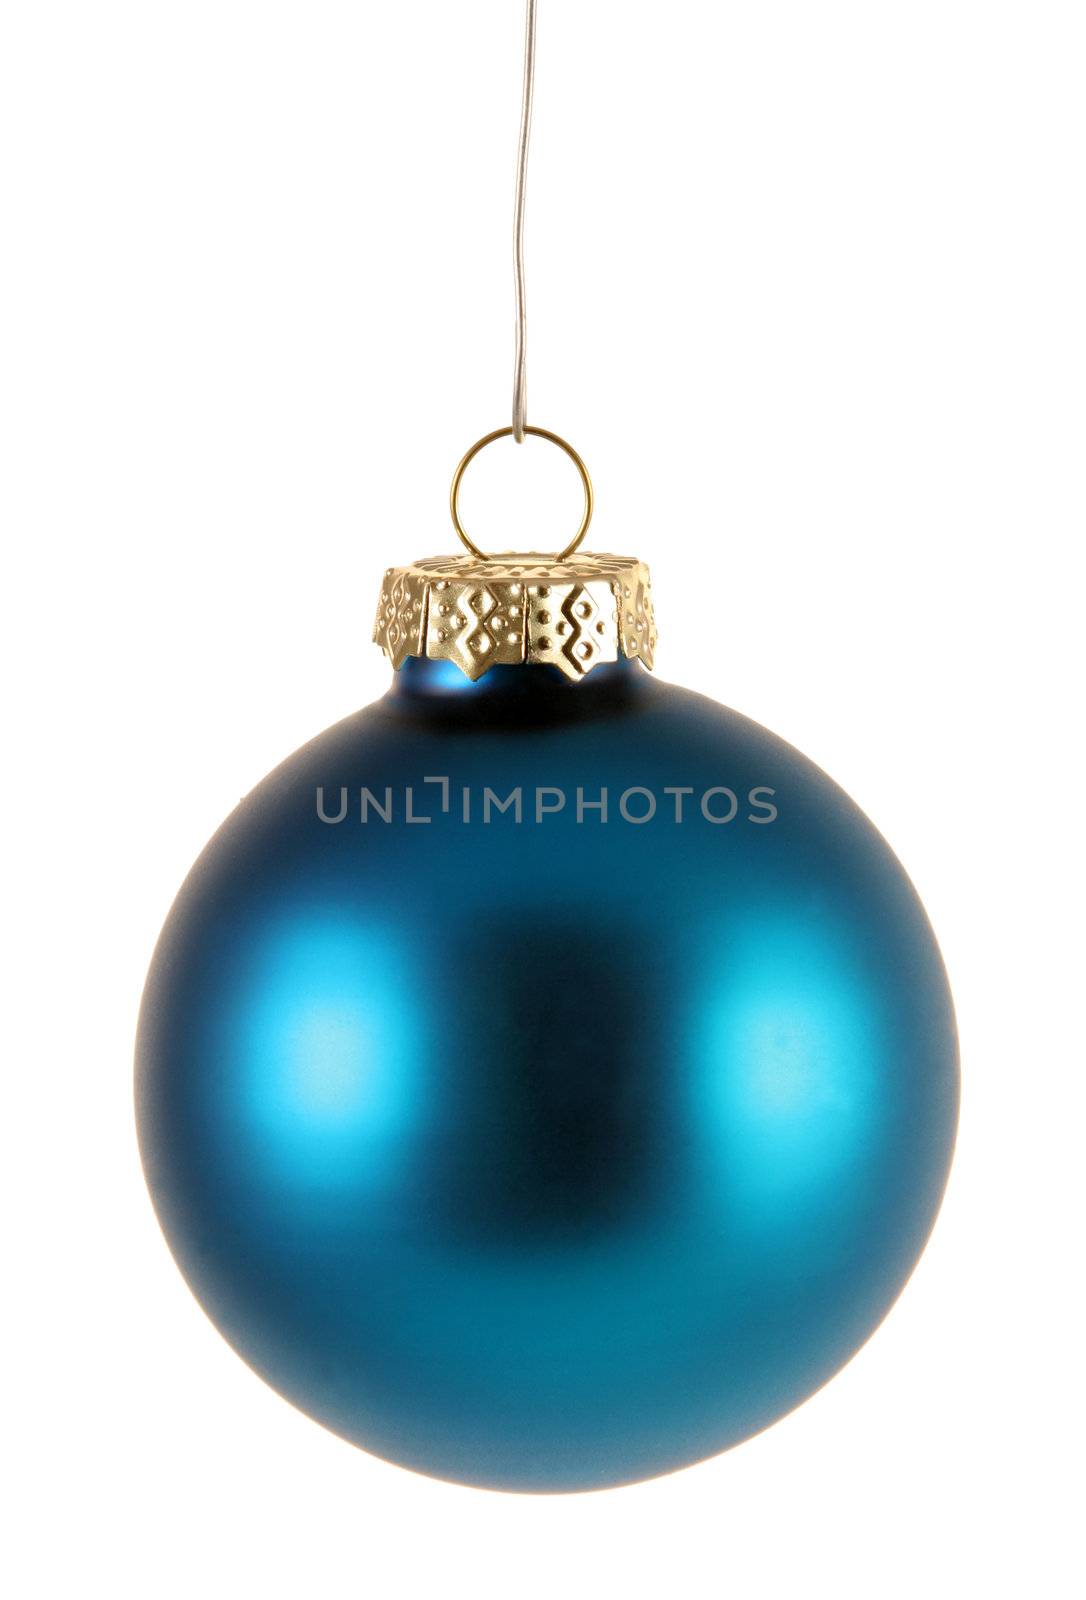 A single isolated blue Christmas bauble hanging.
